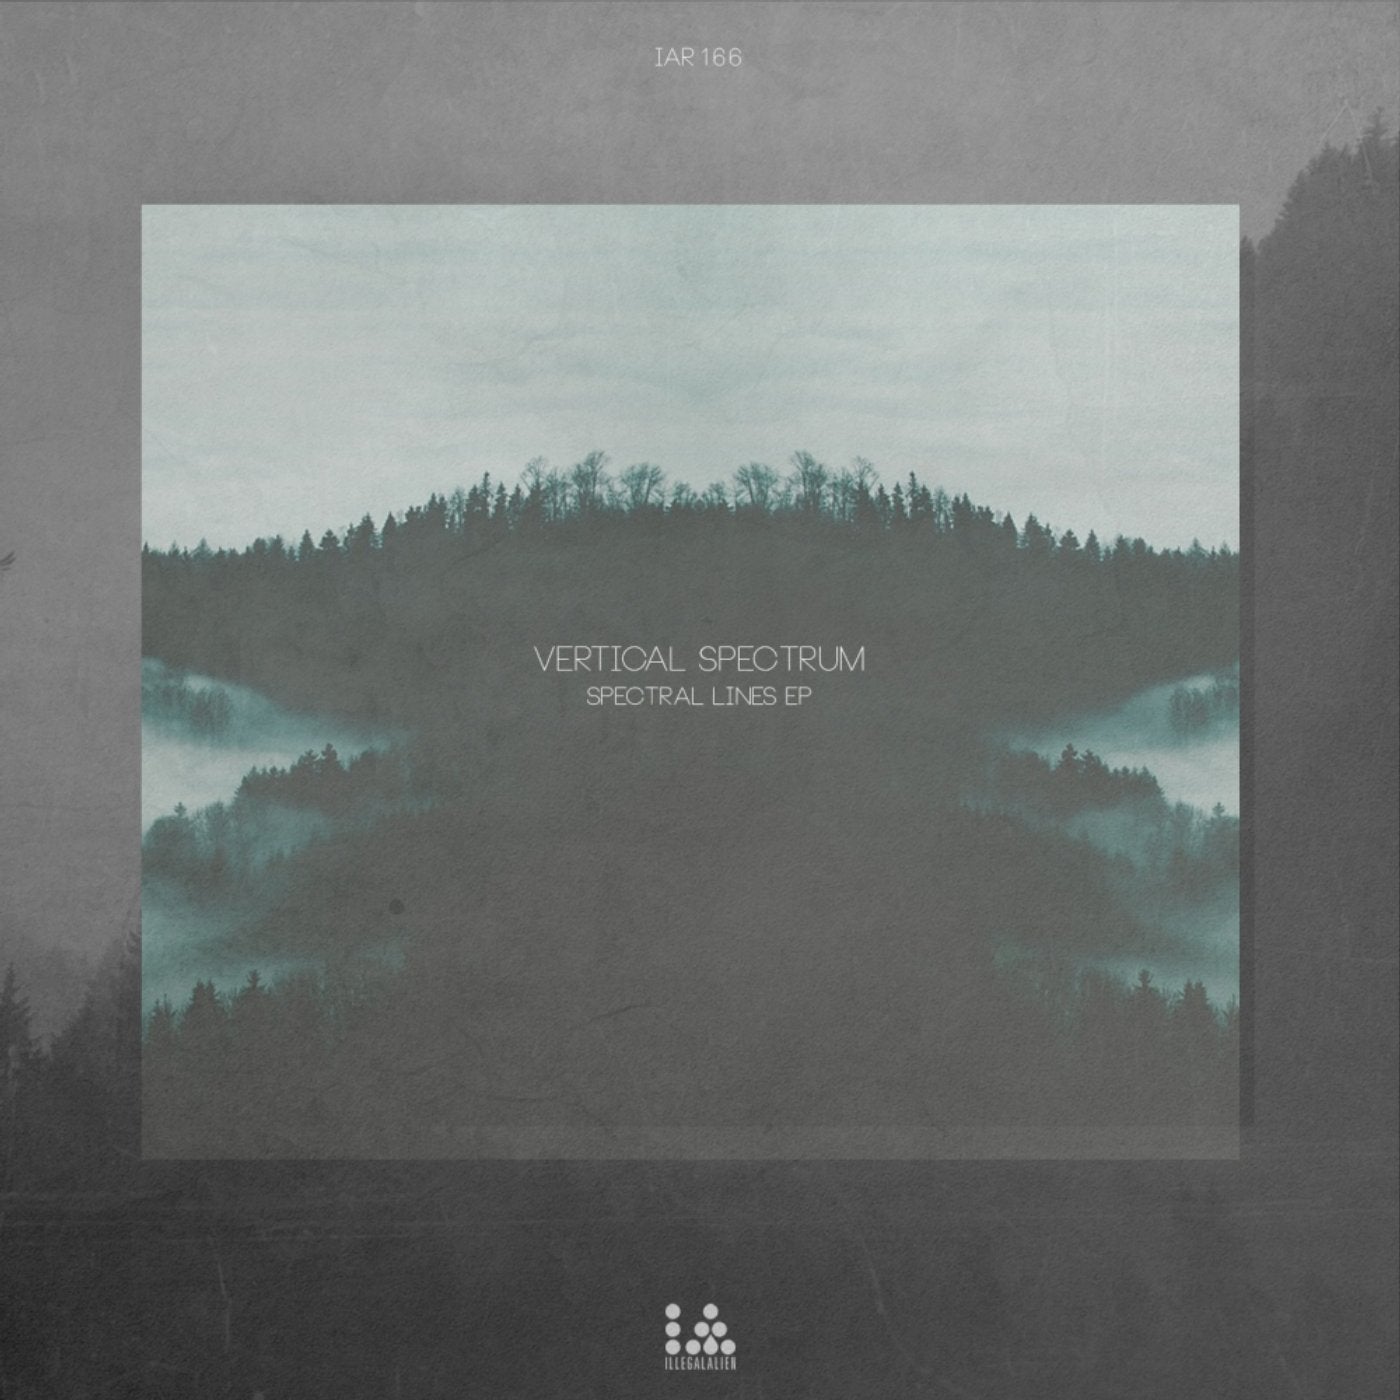 Spectral Lines EP